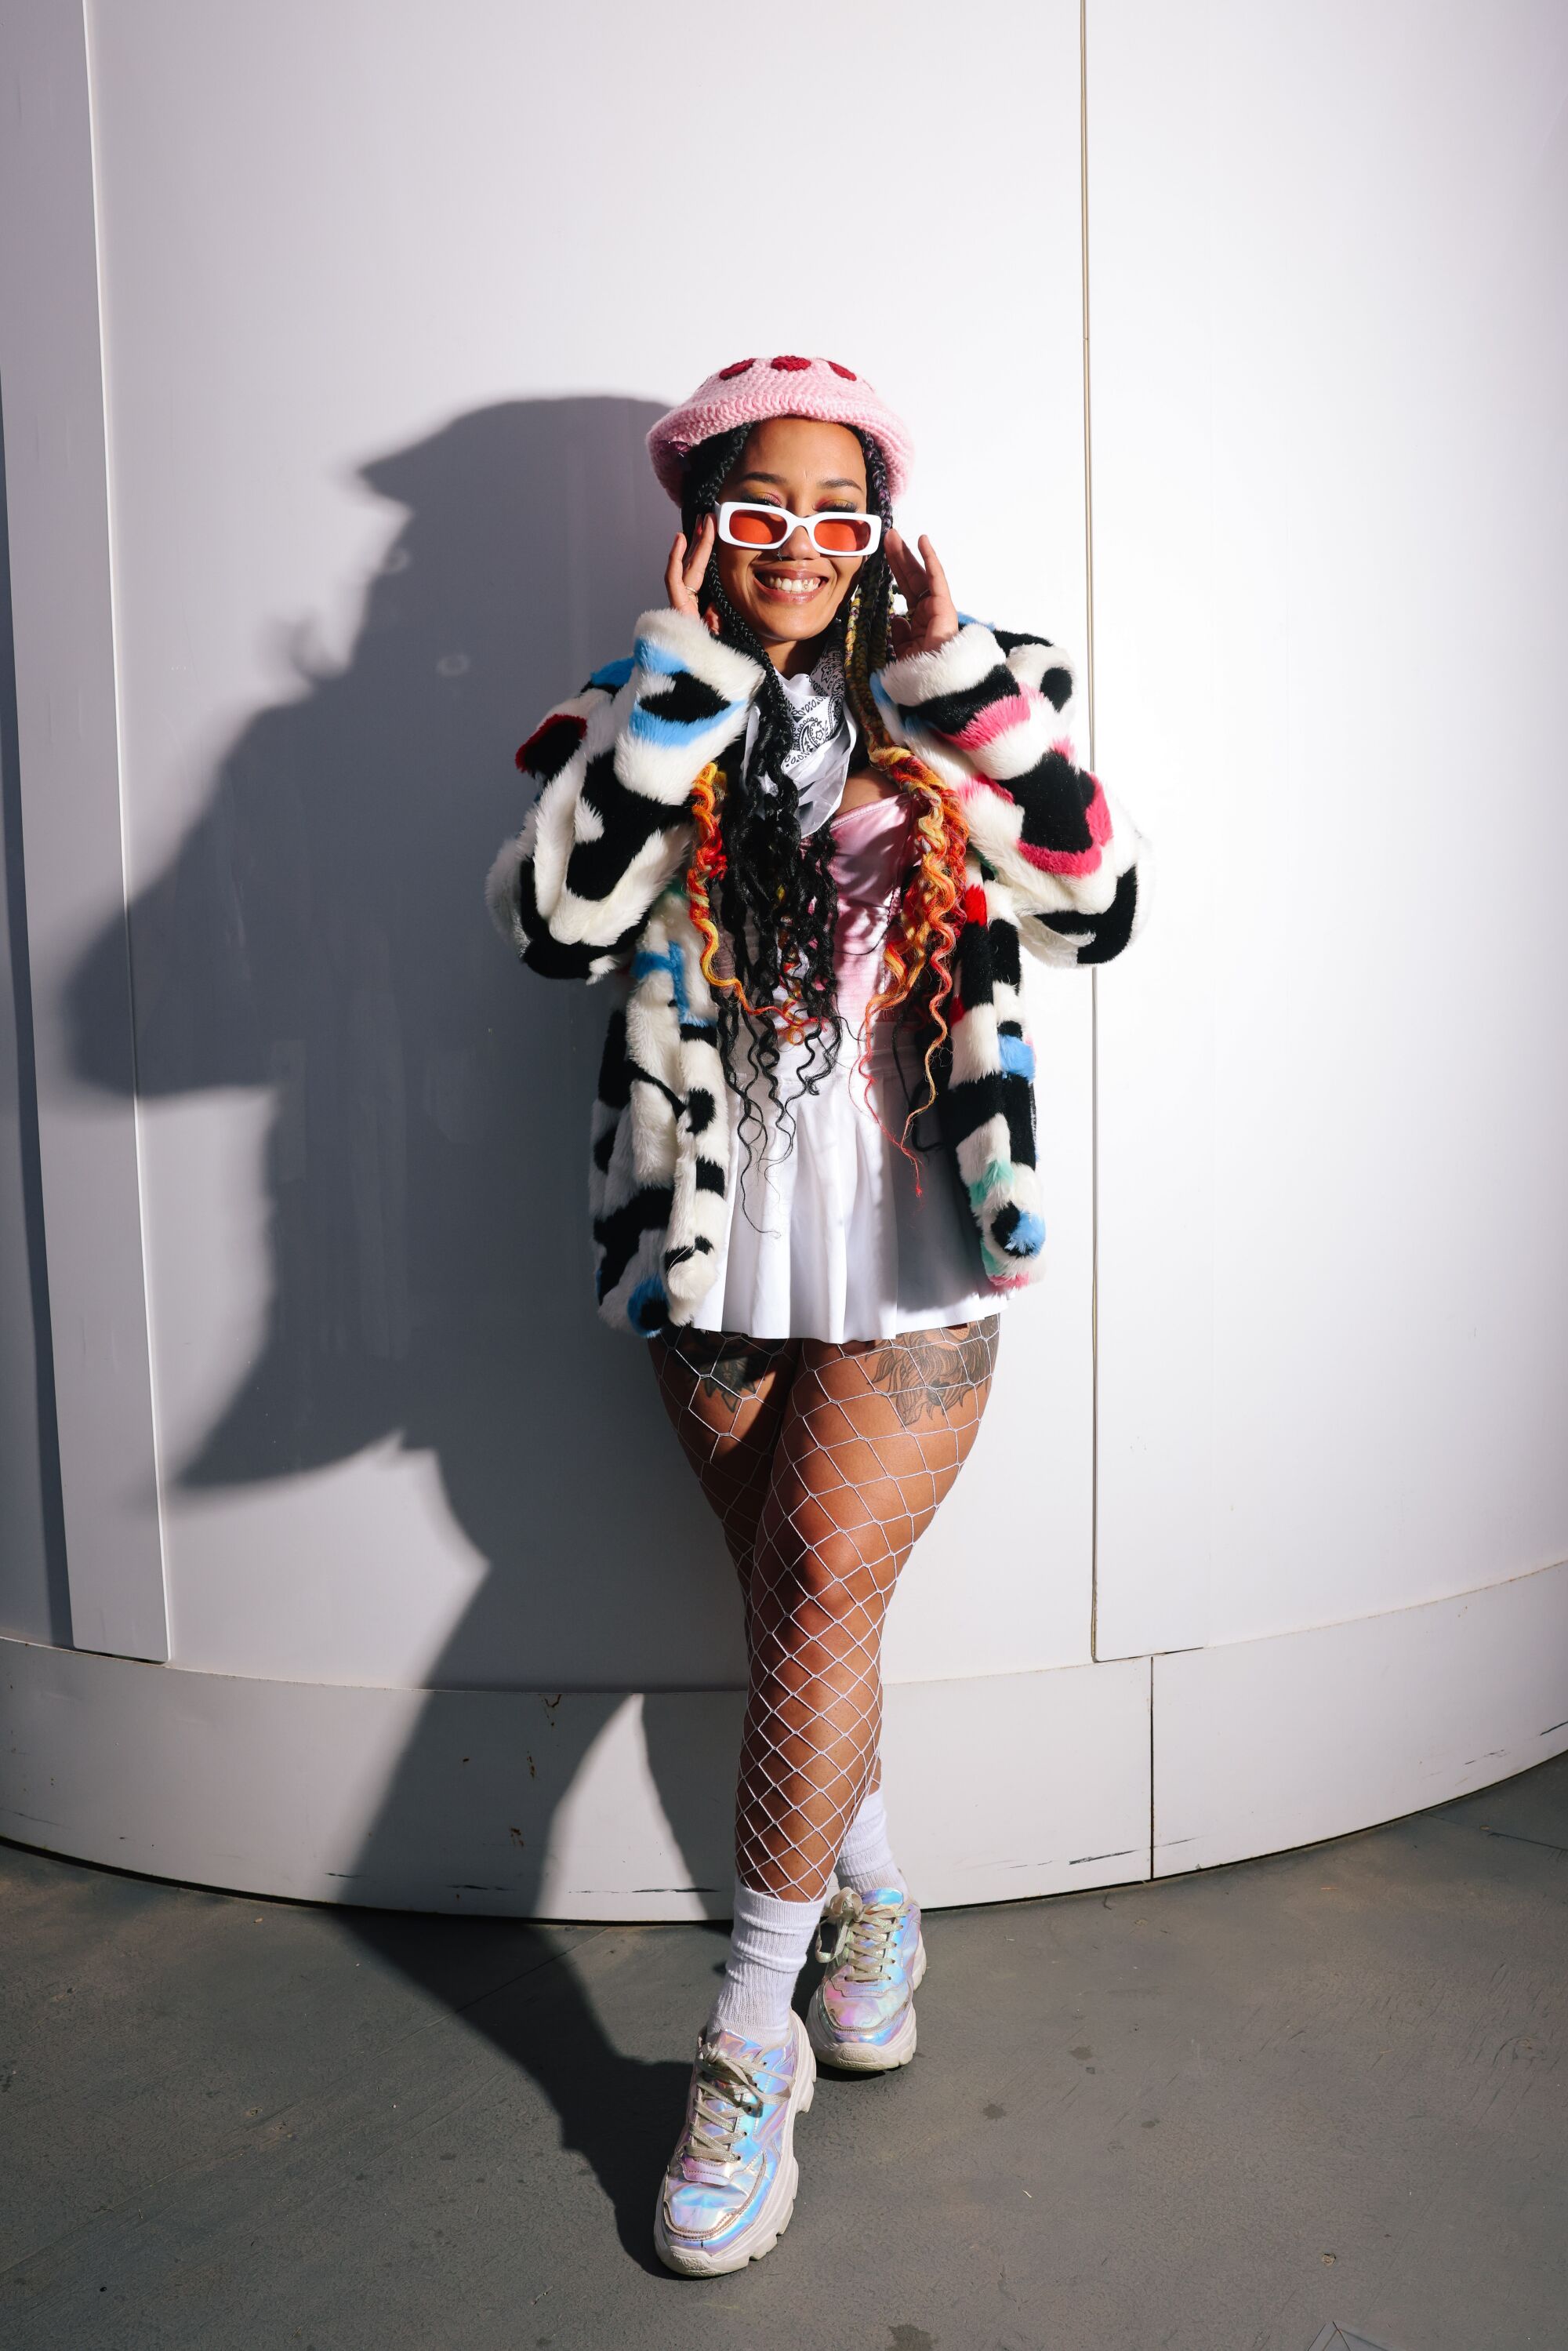 A woman wearing a hat, furry coat and sunglasses poses against a wall